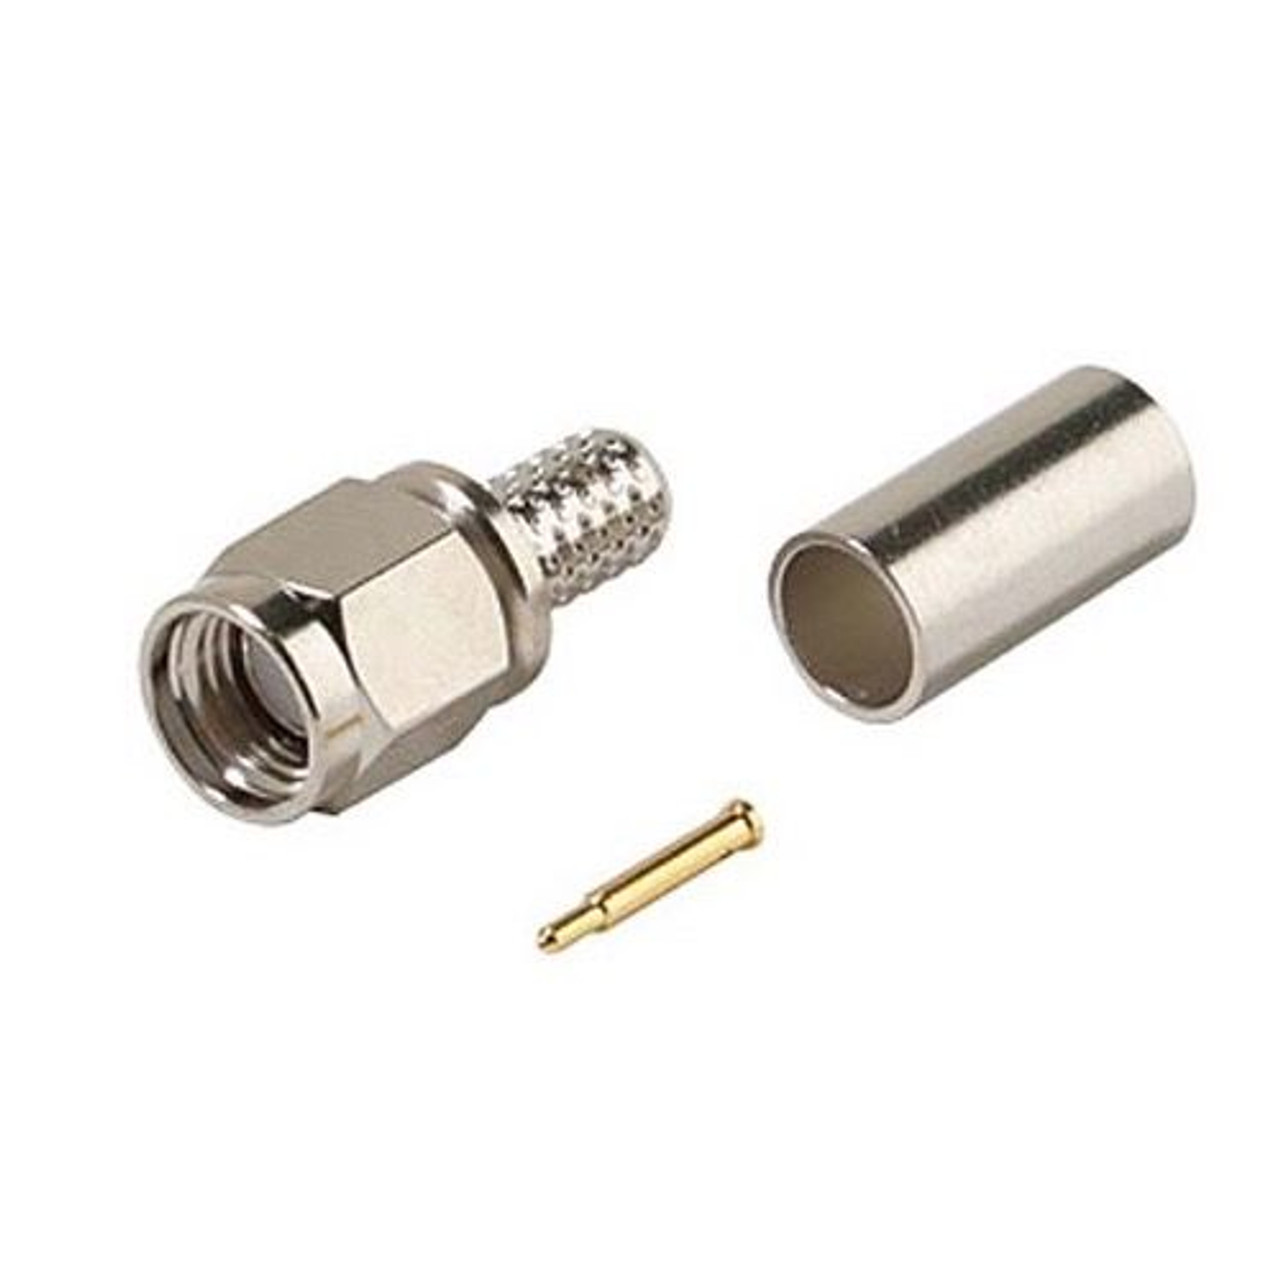 Steren 200-844 SMA Male Crimp 3 Piece RG58 Connector Commercial Grade Plug Adapter with Gold Plated Contacts and Teflon Insulator RG-58 Crimp-On Connector SMA Series Component Plug, Part # 200844